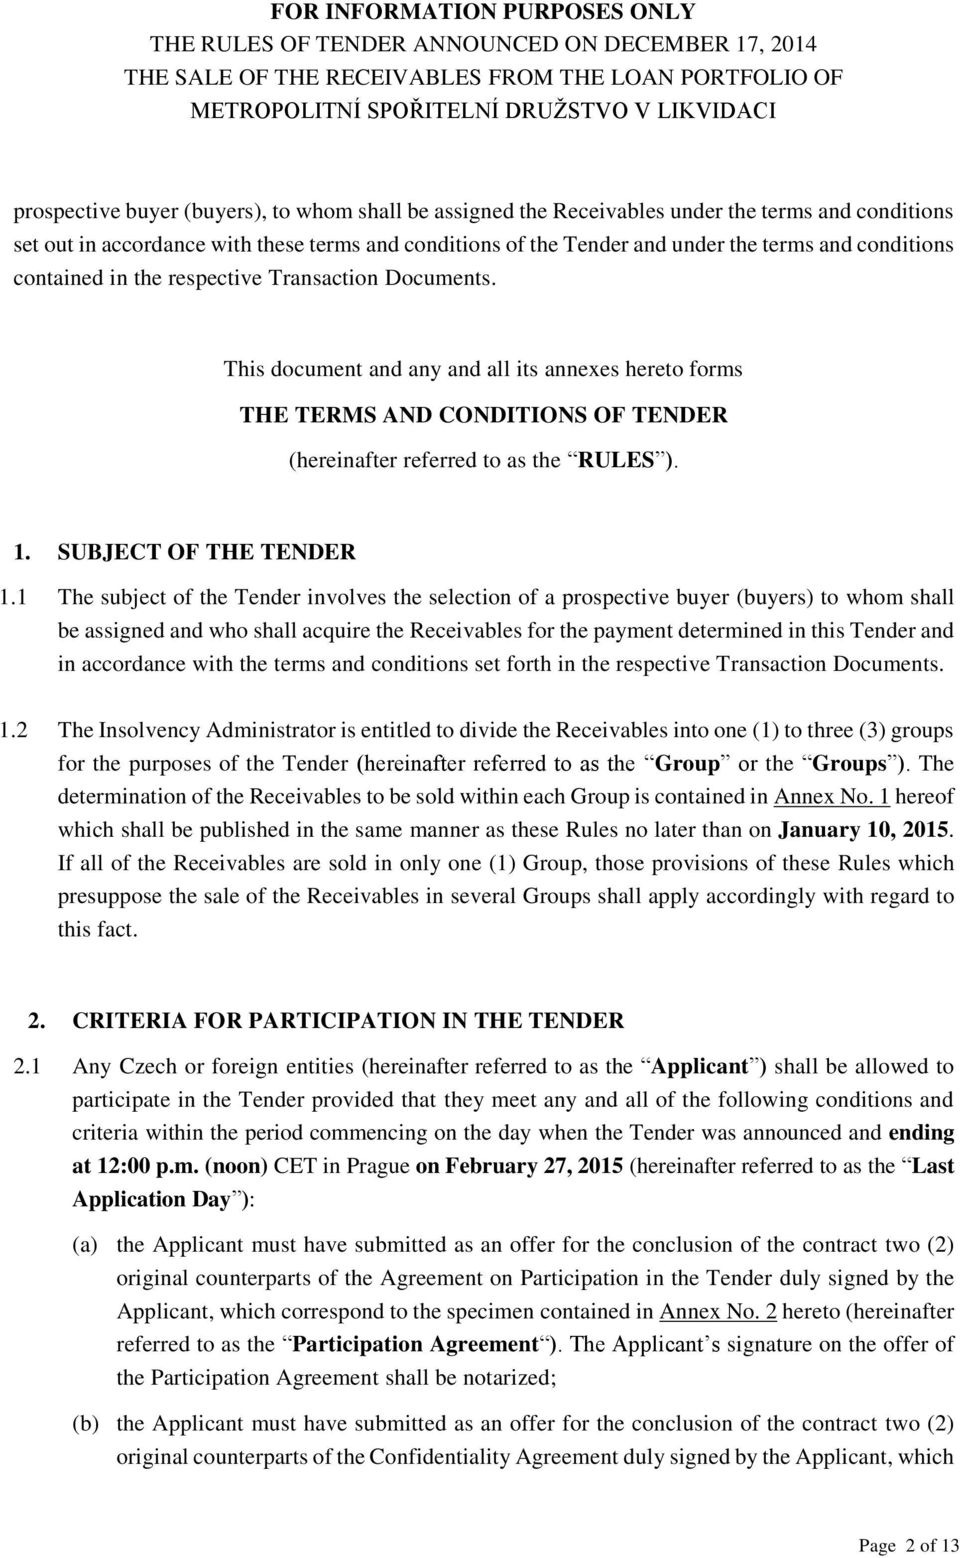 SUBJECT OF THE TENDER 1.